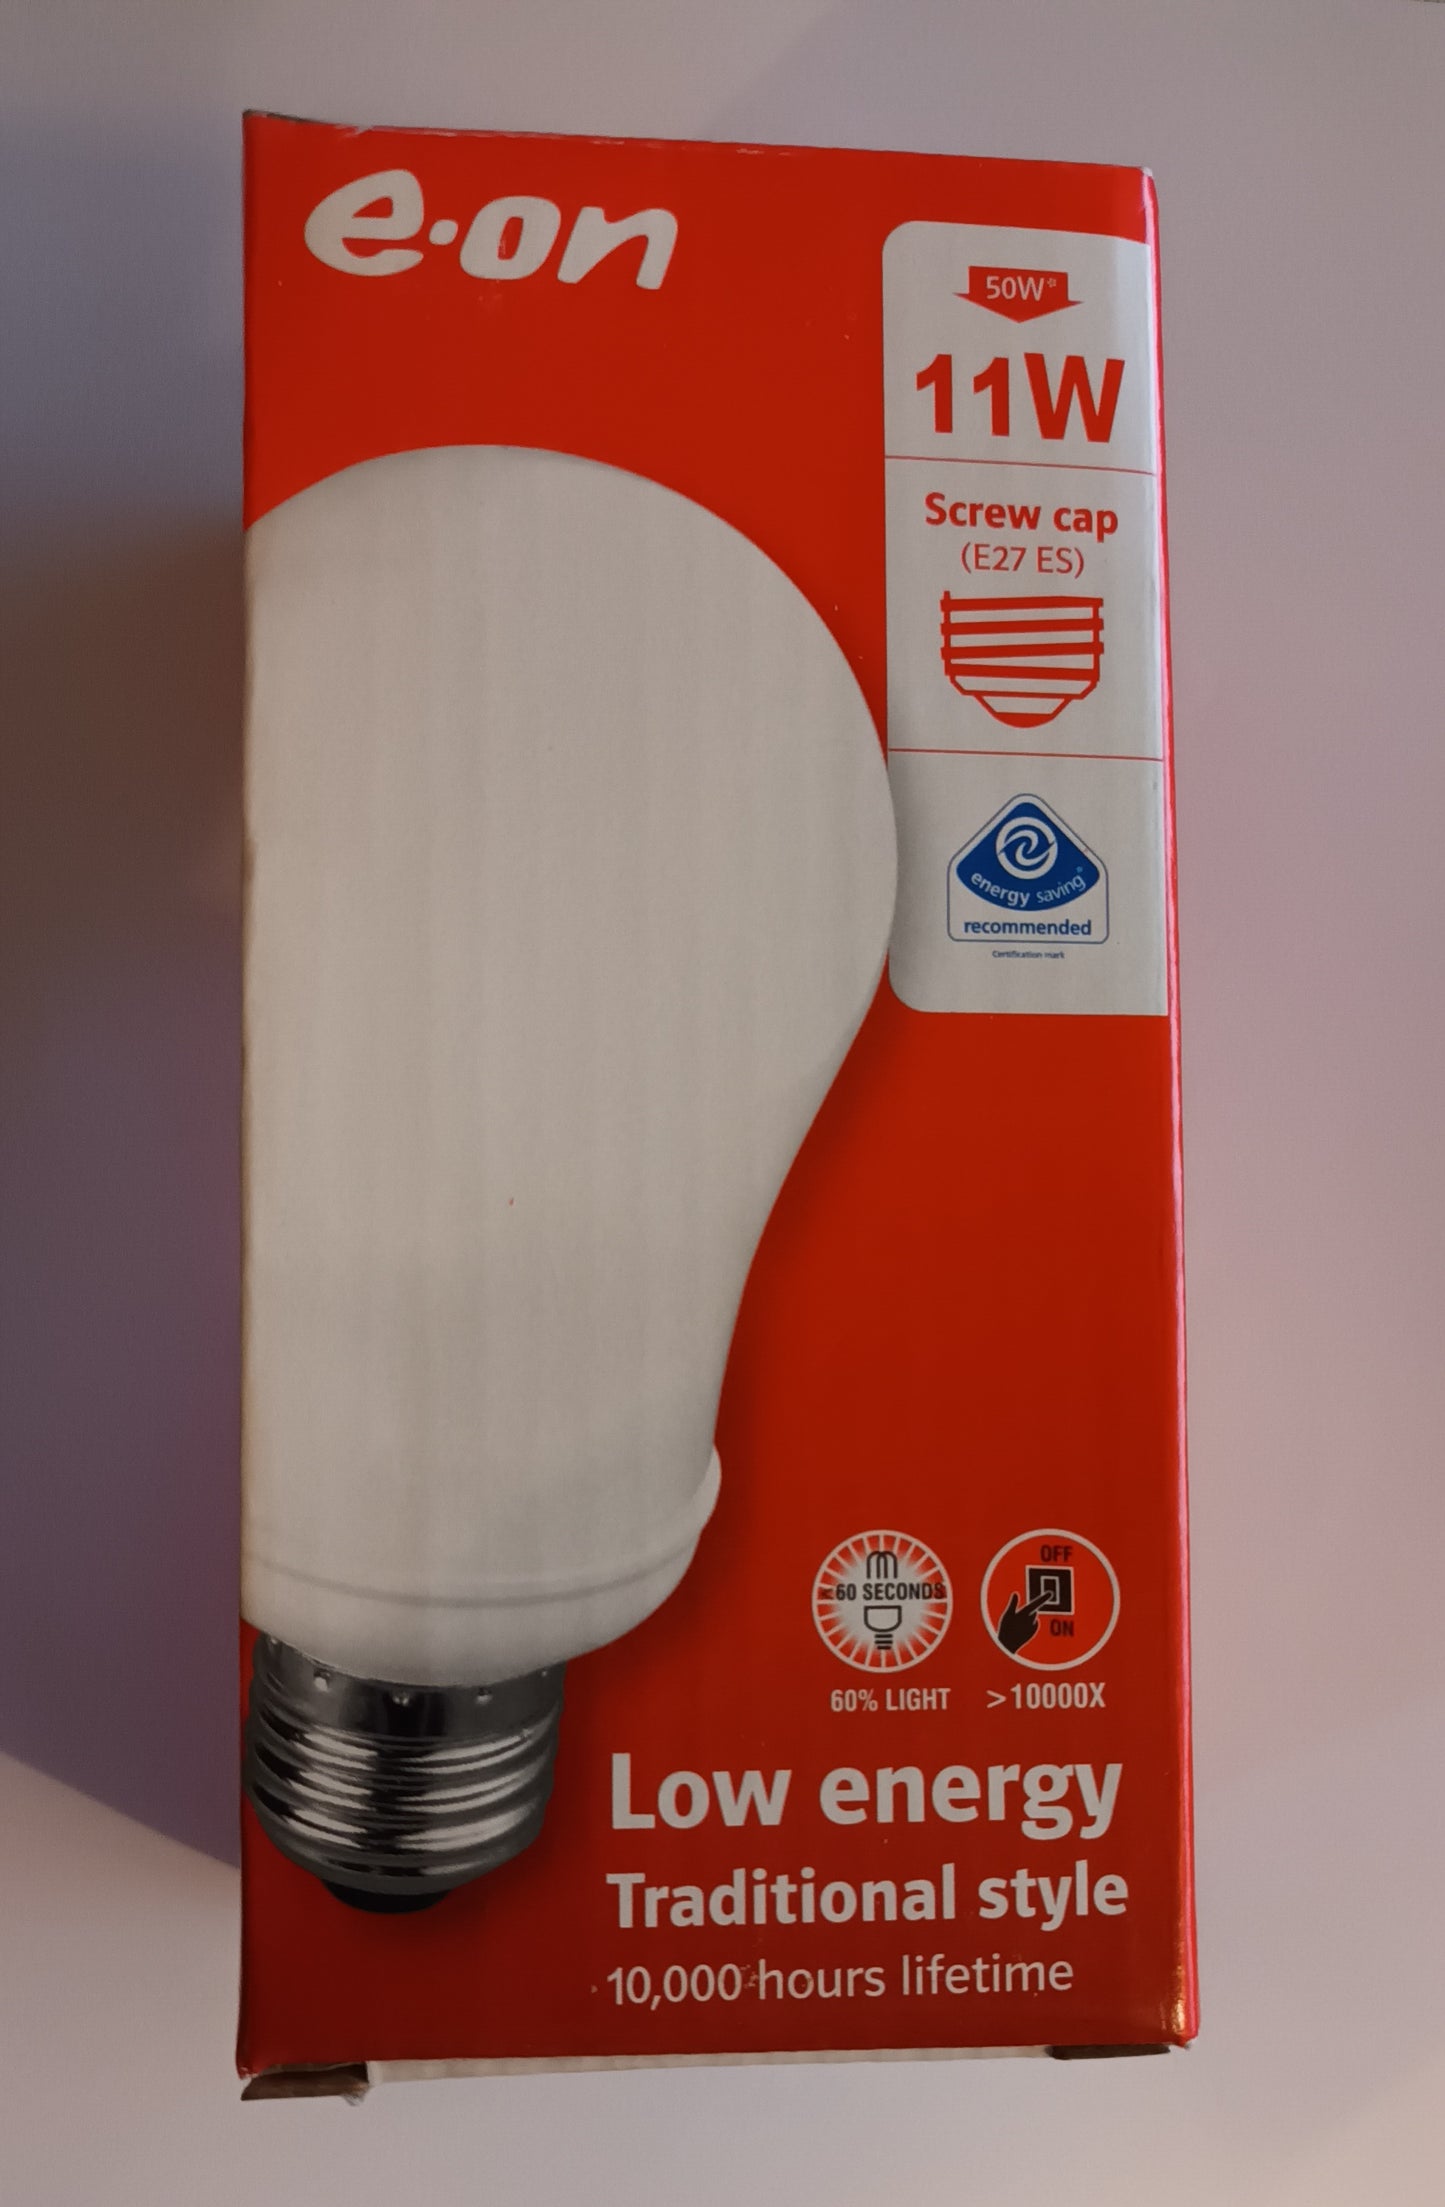 Eon 11w Low Energy Traditional Style Screw Light Bulb from £2